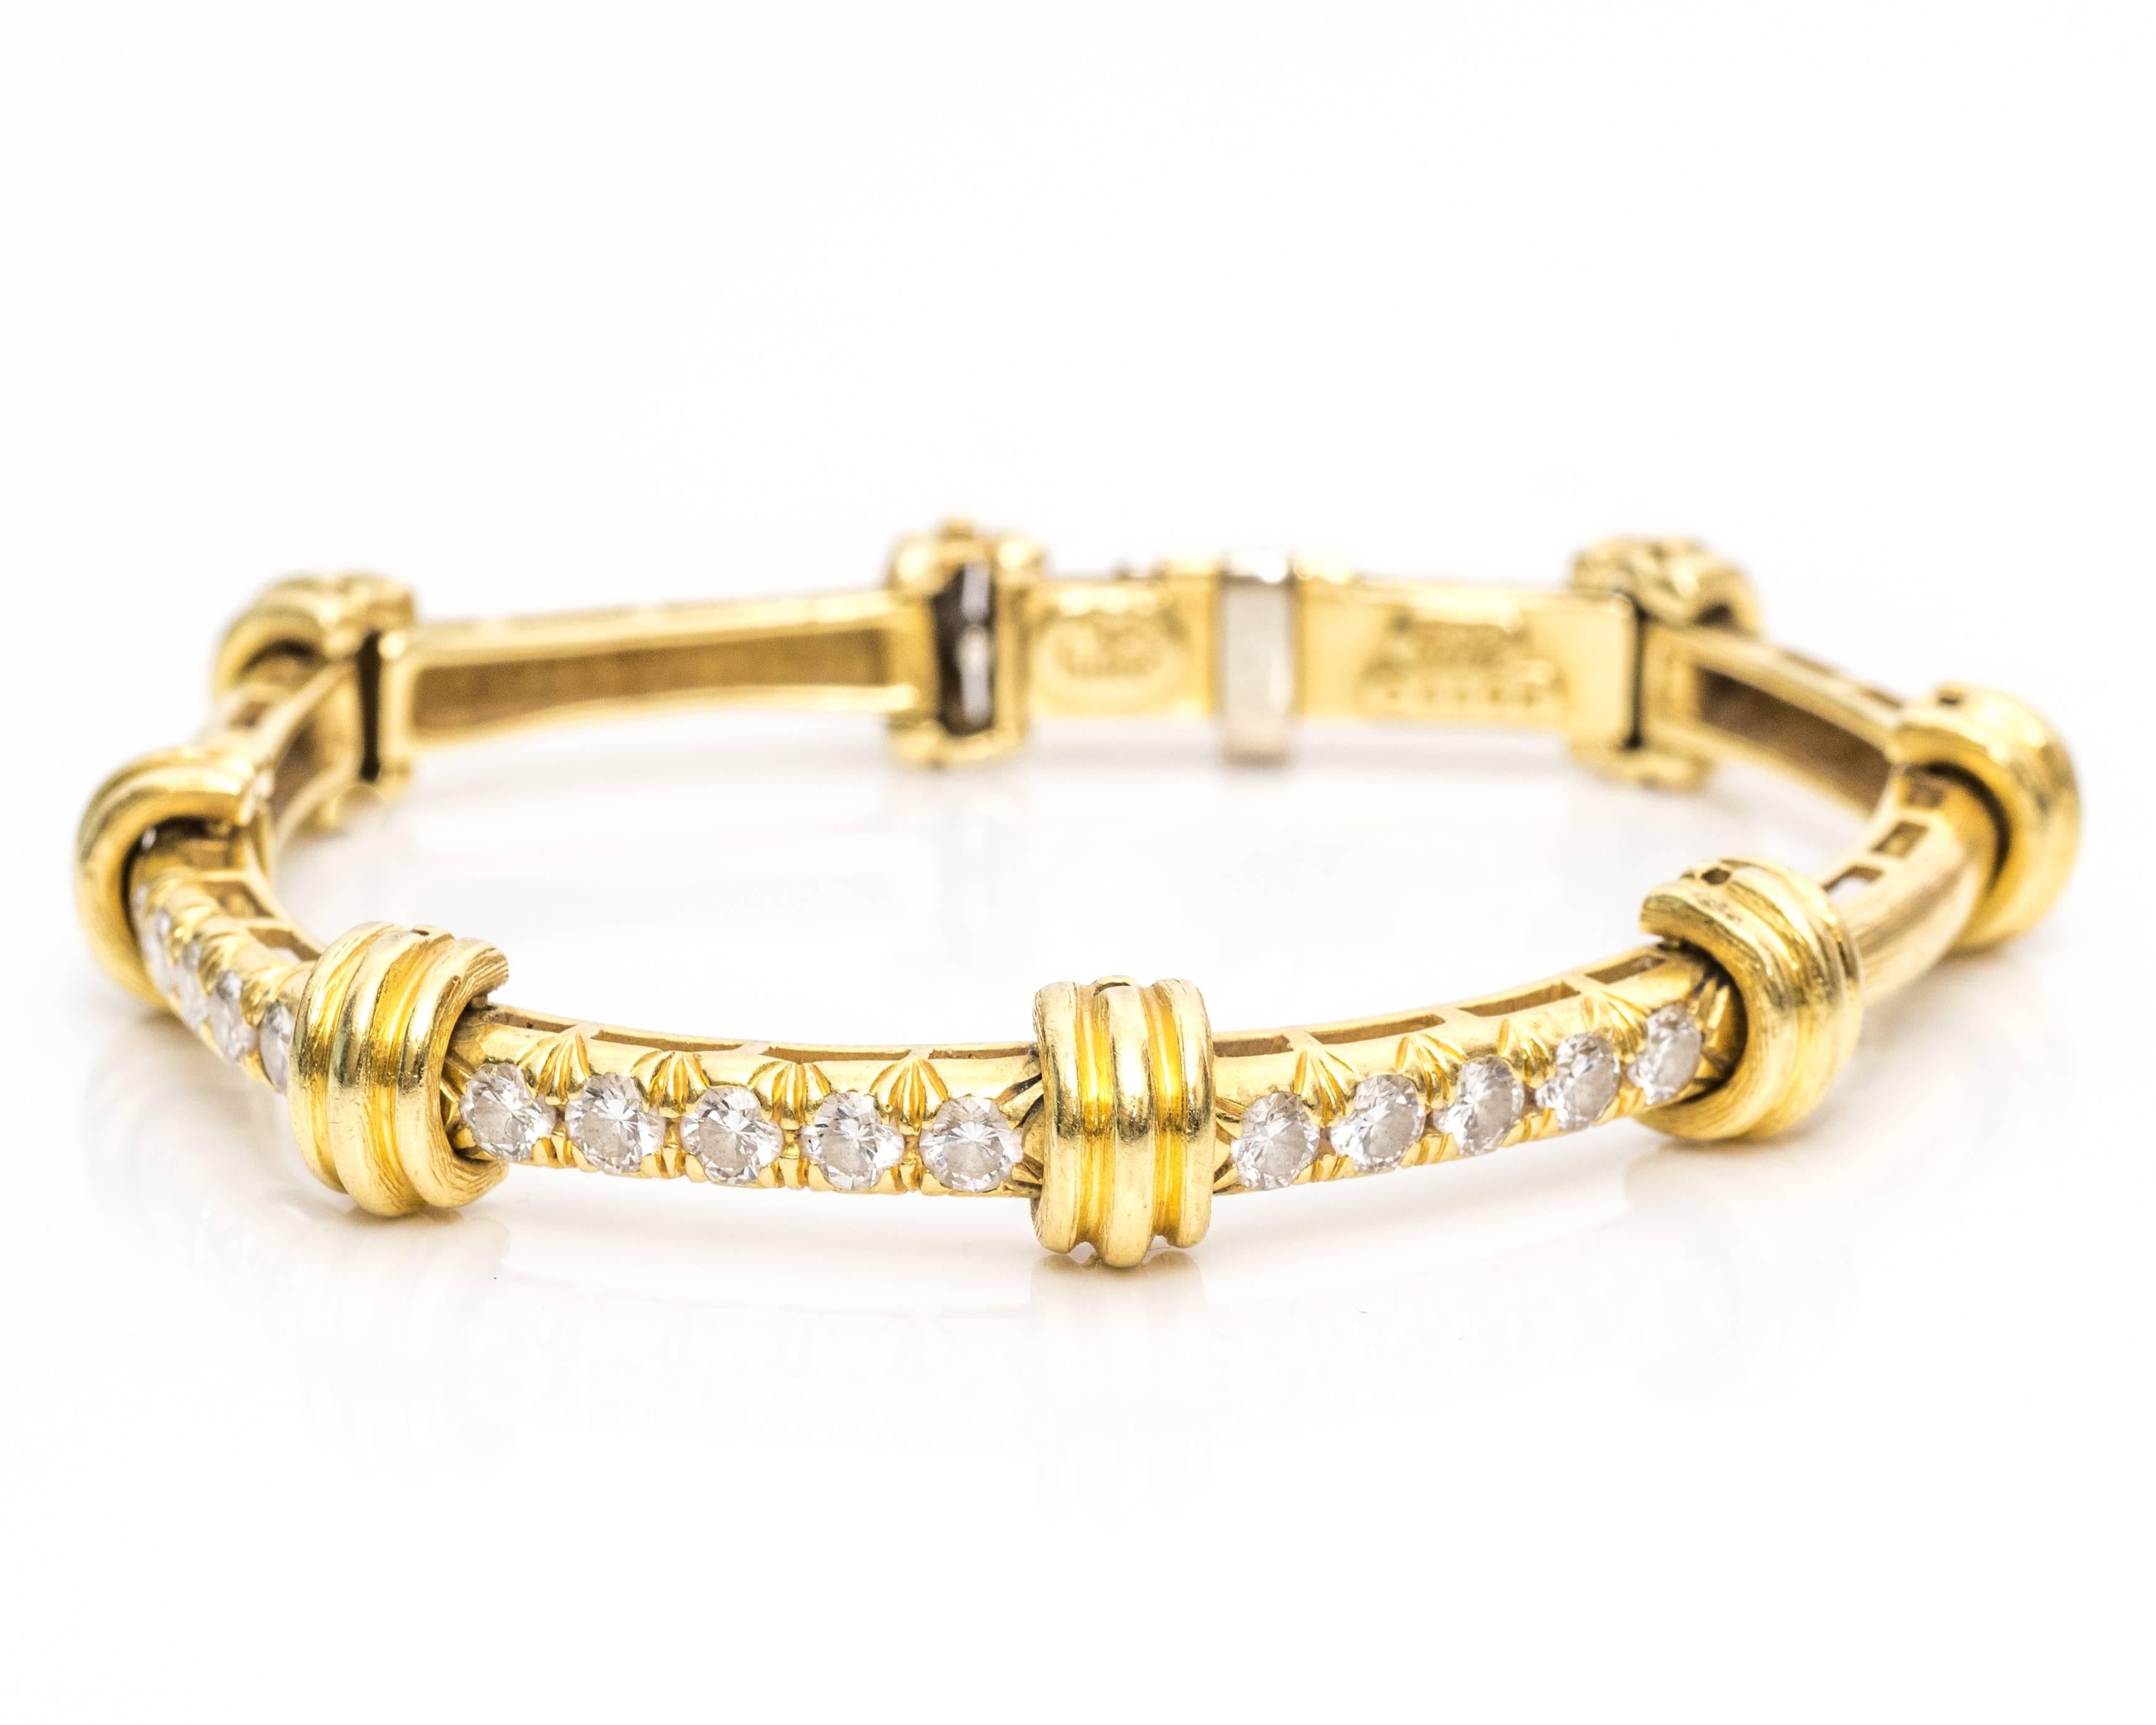 Dunay Bracelet from 1990s
Frame is bamboo inspired pattern along each chain link.
Features Diamonds on three front chain links.
Total of 15 Diamonds, measuring 2 carats total 
Small Gallery Underneath Each Link
Crafted in 18 Karat Yellow Gold
The